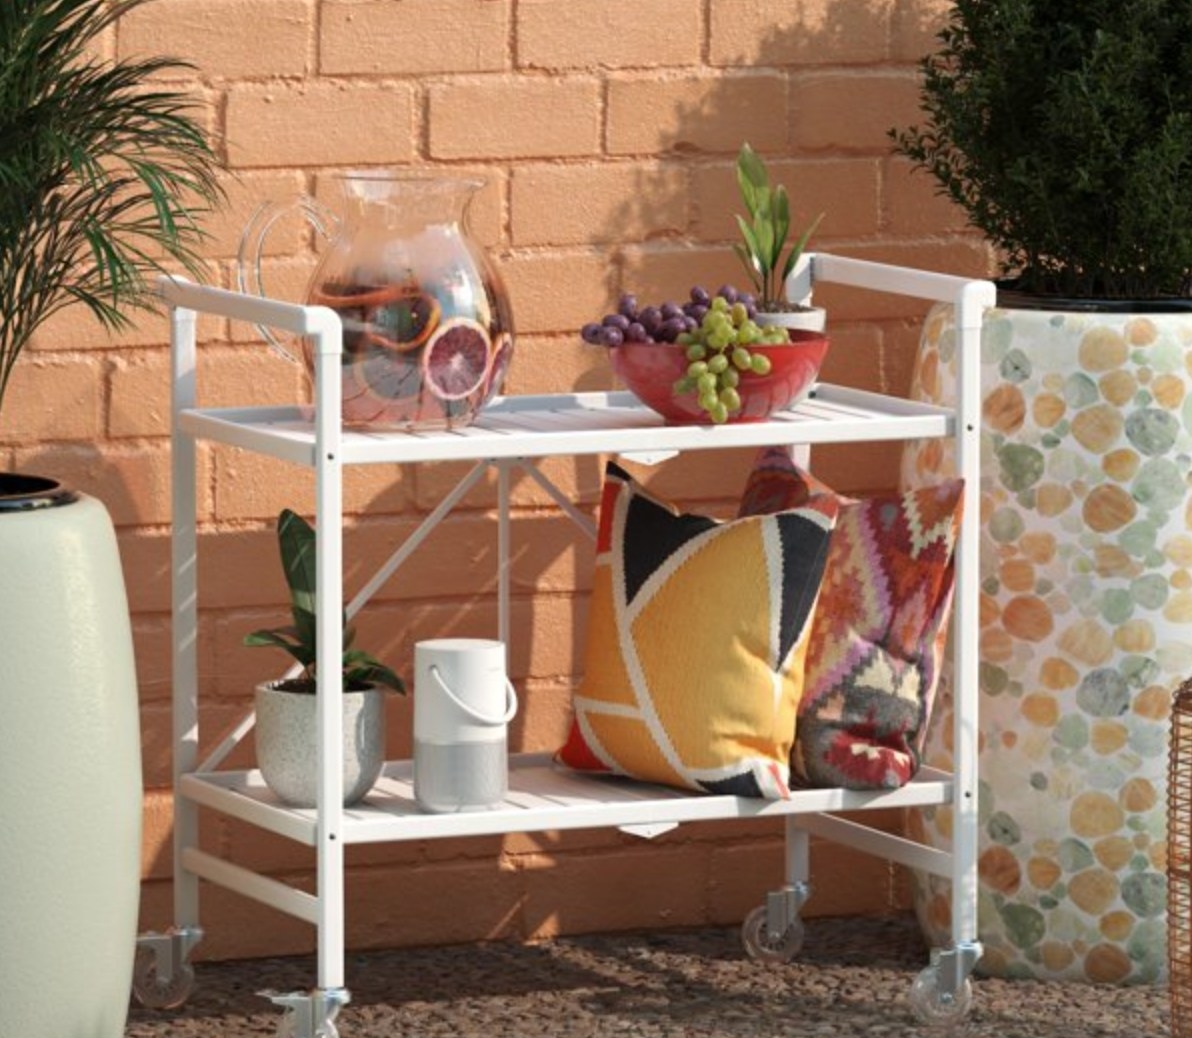 the white serving cart out on a patio